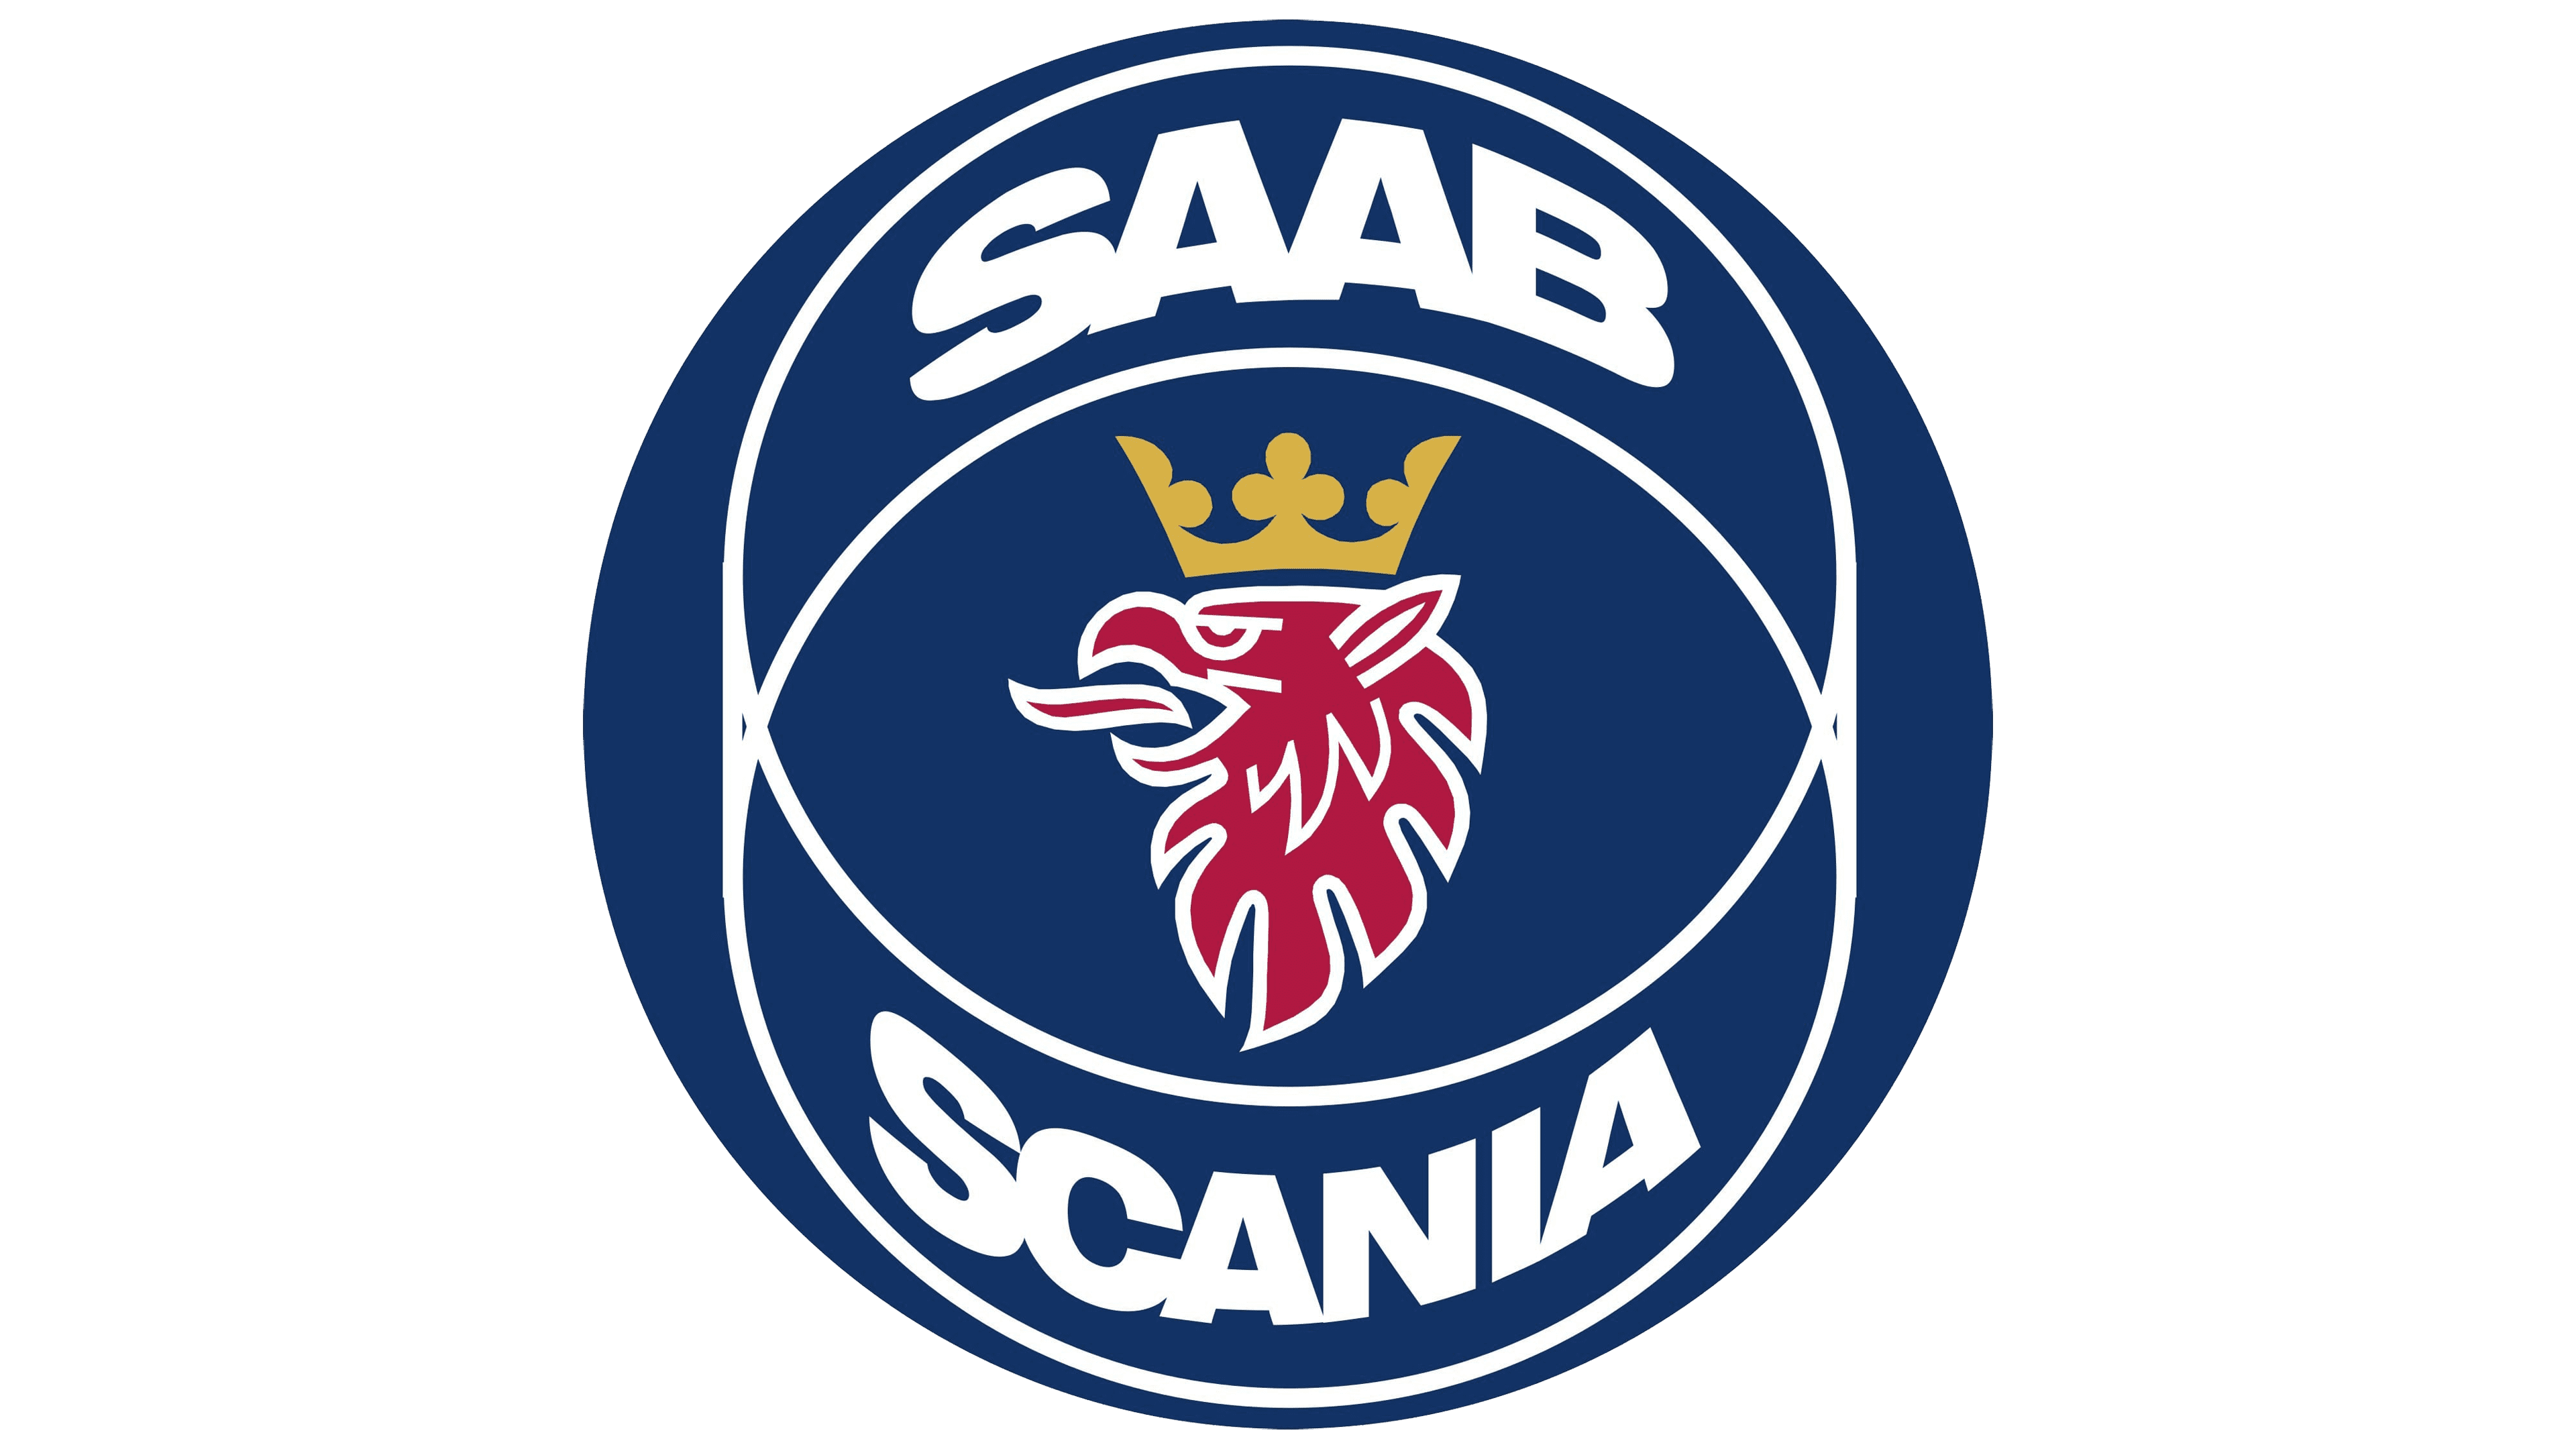 Scania Logo Meaning and History [Scania symbol]